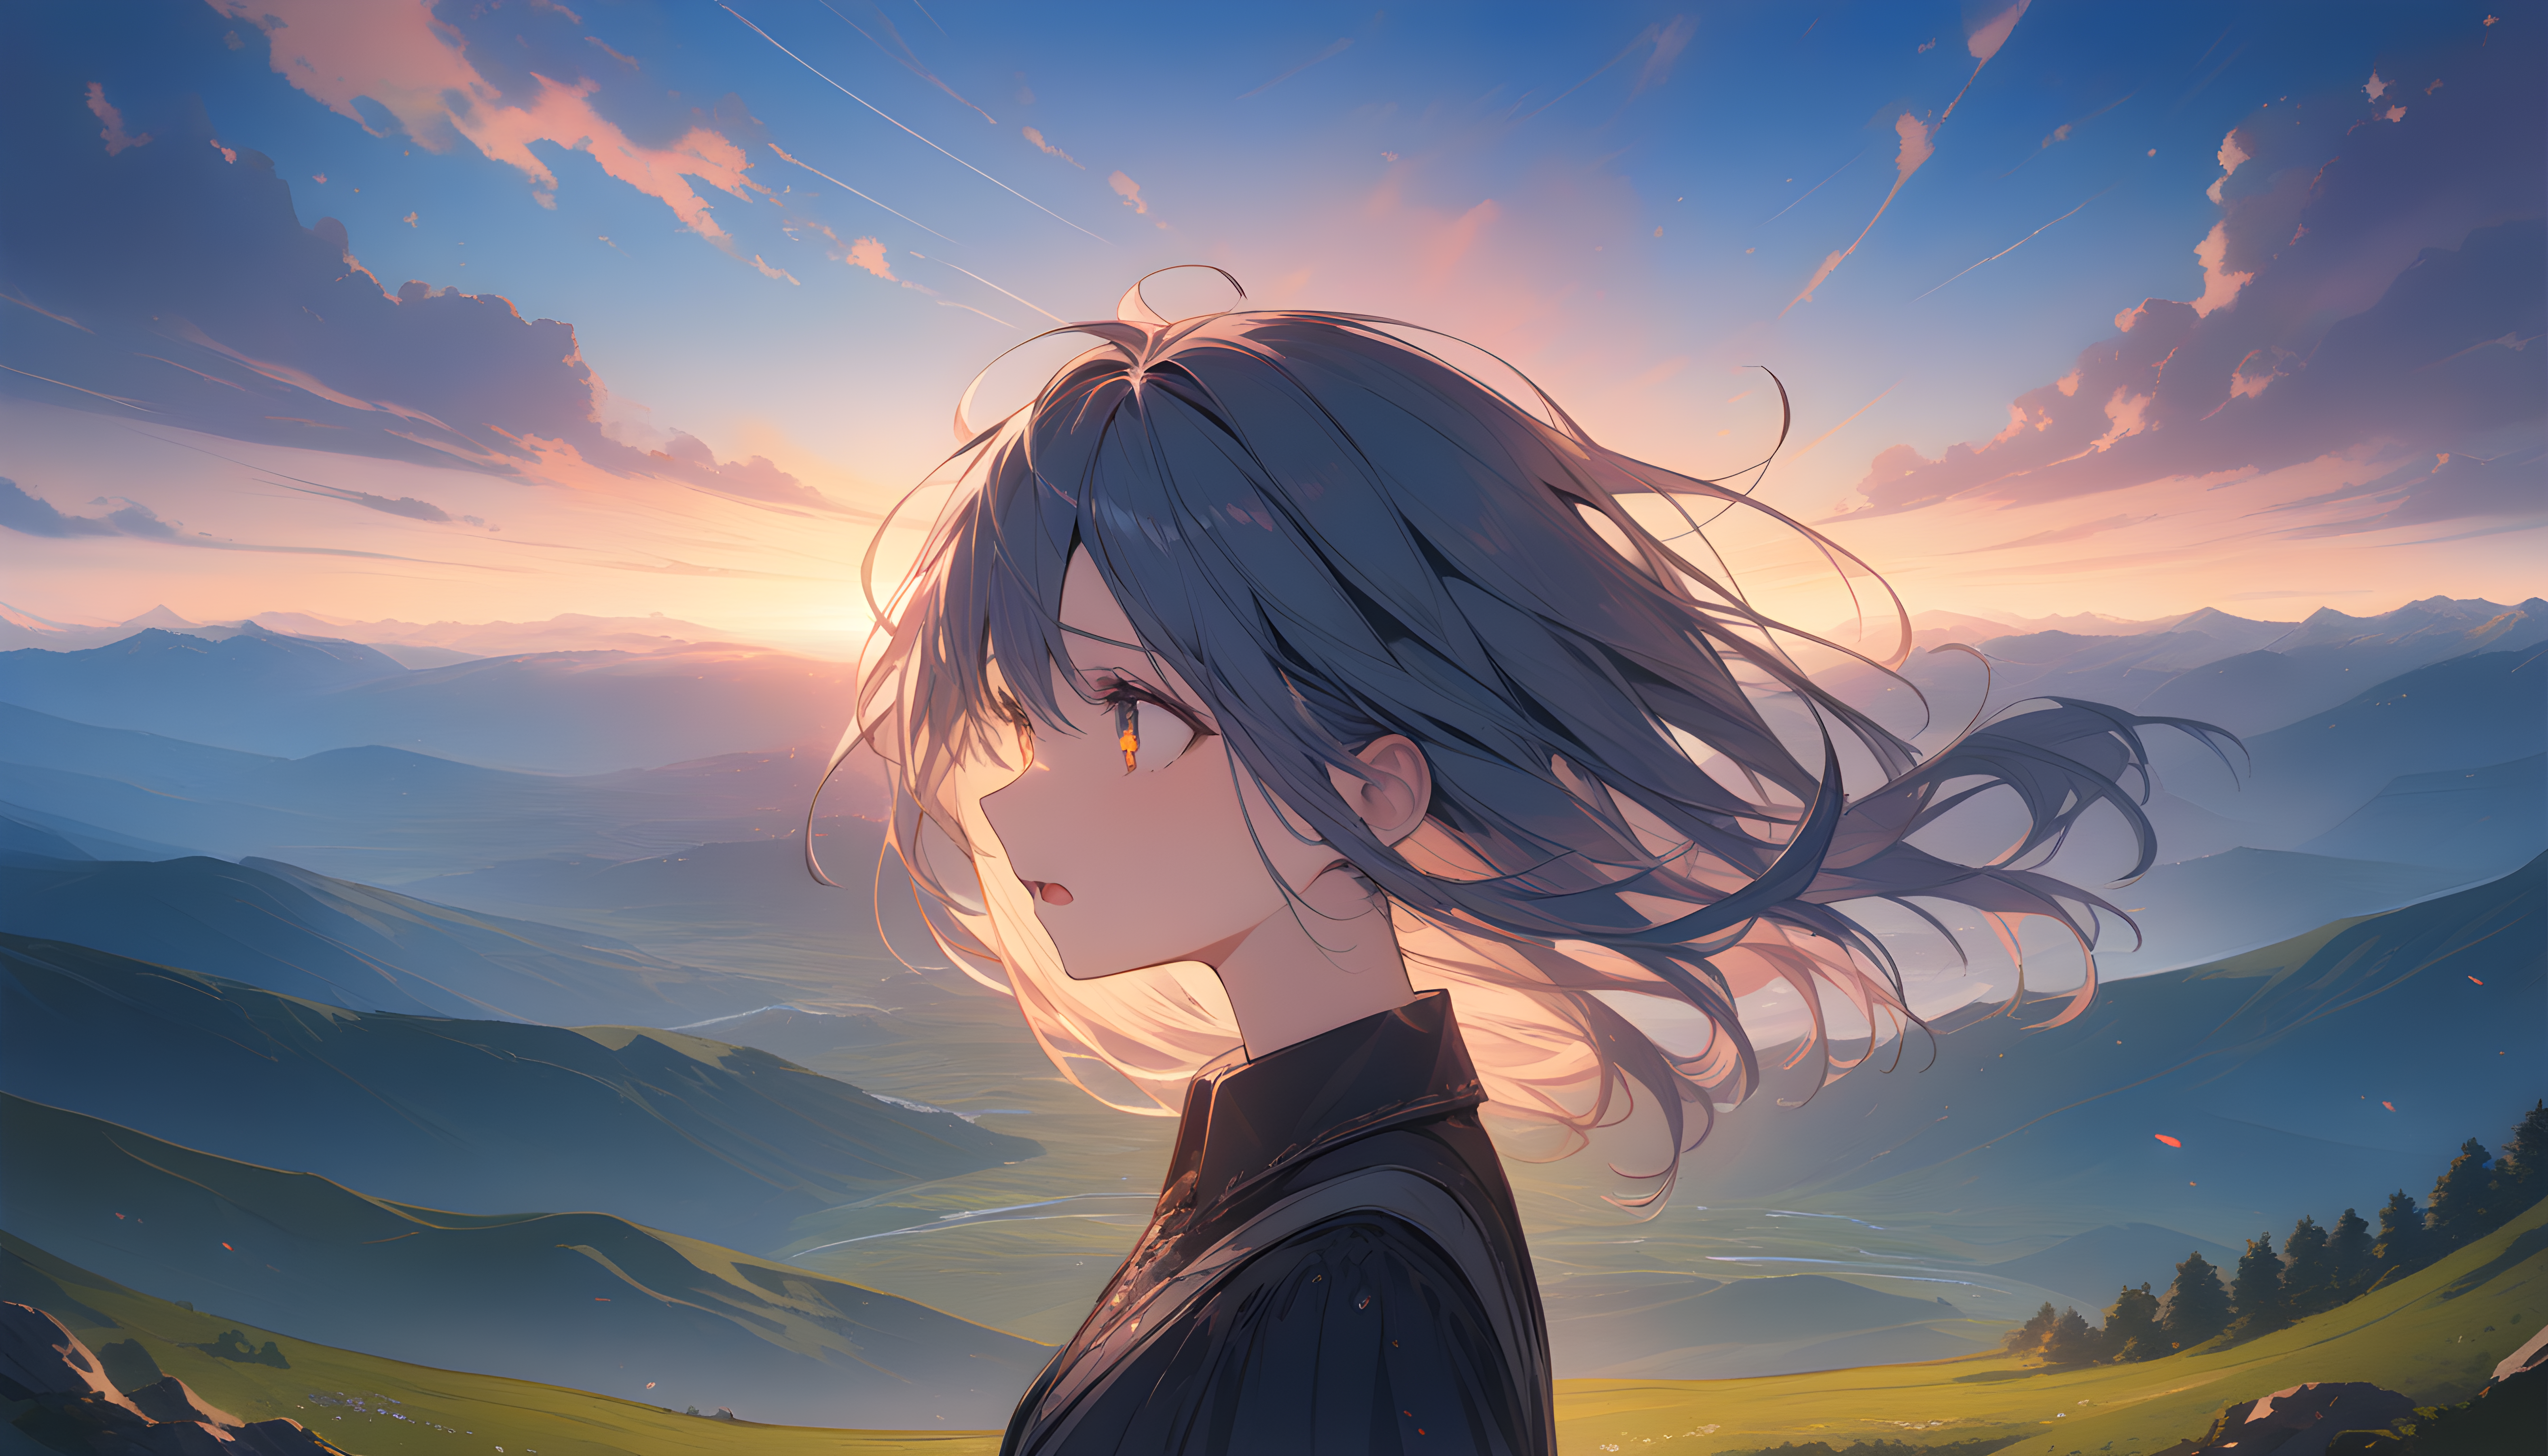 Anime 5376x3072 anime girls abstract Stable Diffusion cinematic sunlight outdoors women outdoors open mouth long hair landscape clouds sky hills trees side view wind hair blowing in the wind anime looking away